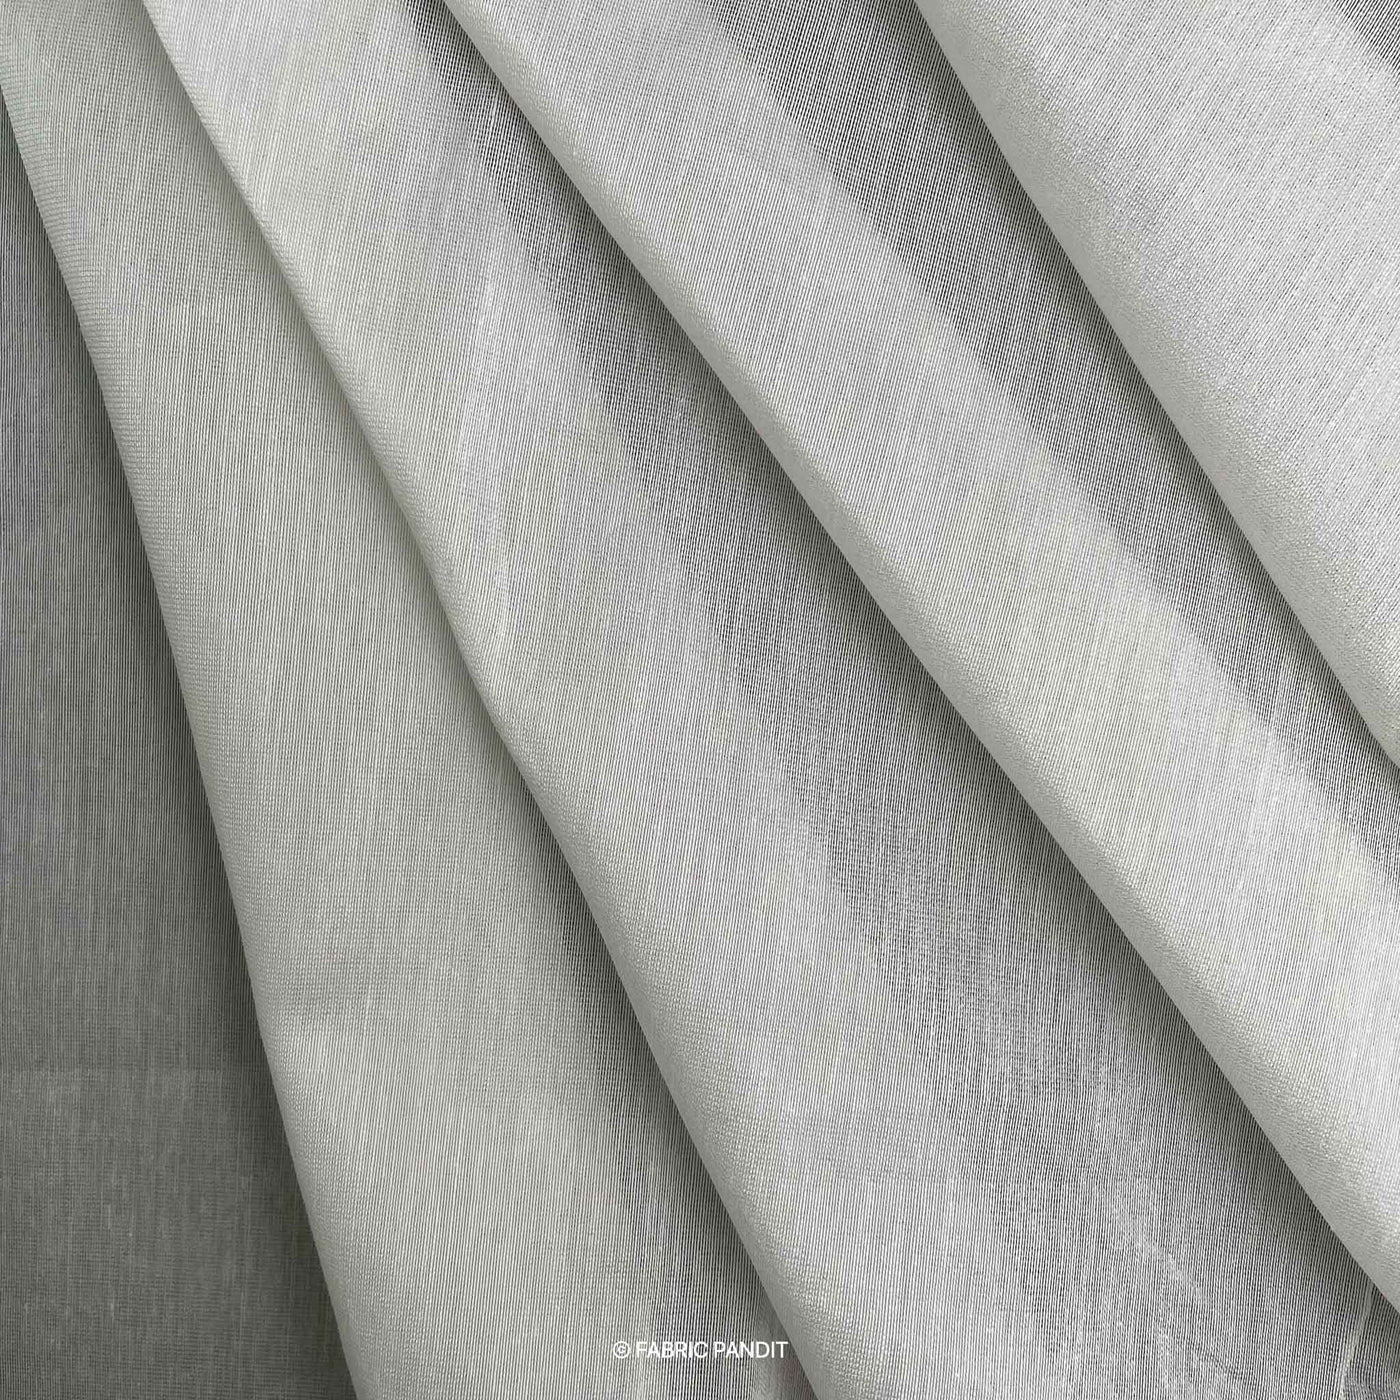 Fabric Pandit Fabric White Plain Dyeable Pure Silk Chanderi (Width 44 inches)